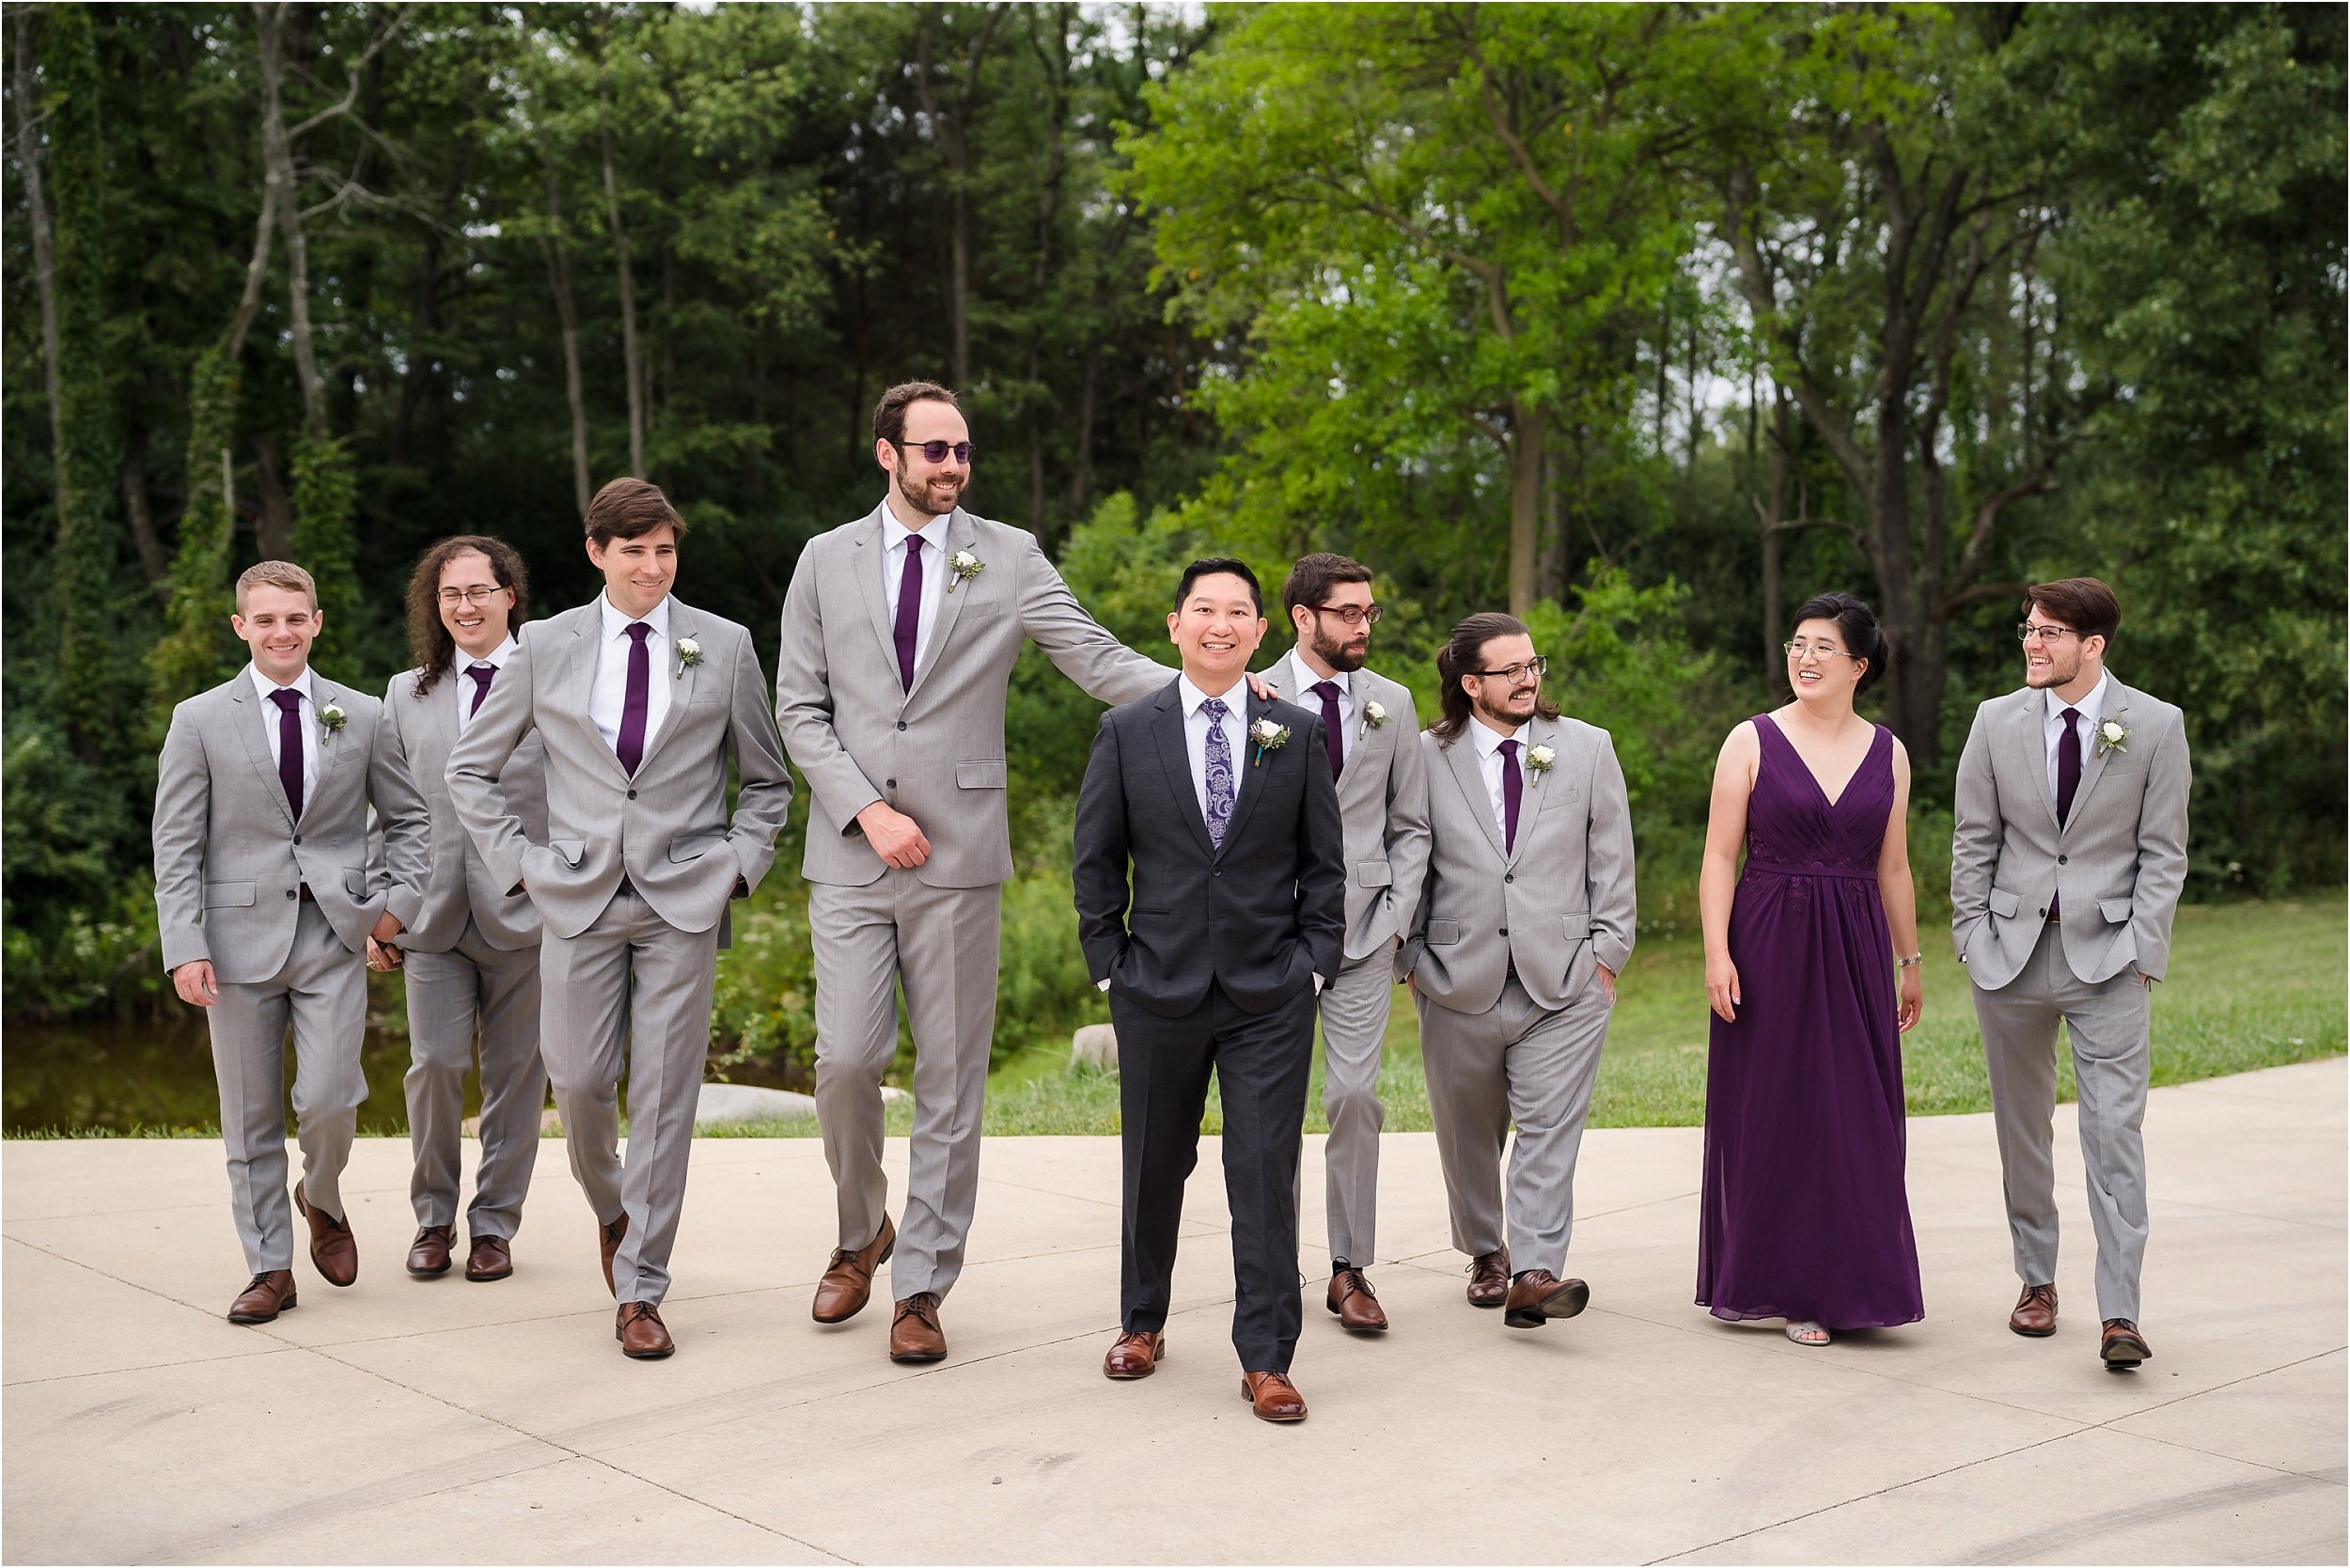  A groom and his groomsmen walking towards the camera and talking.  